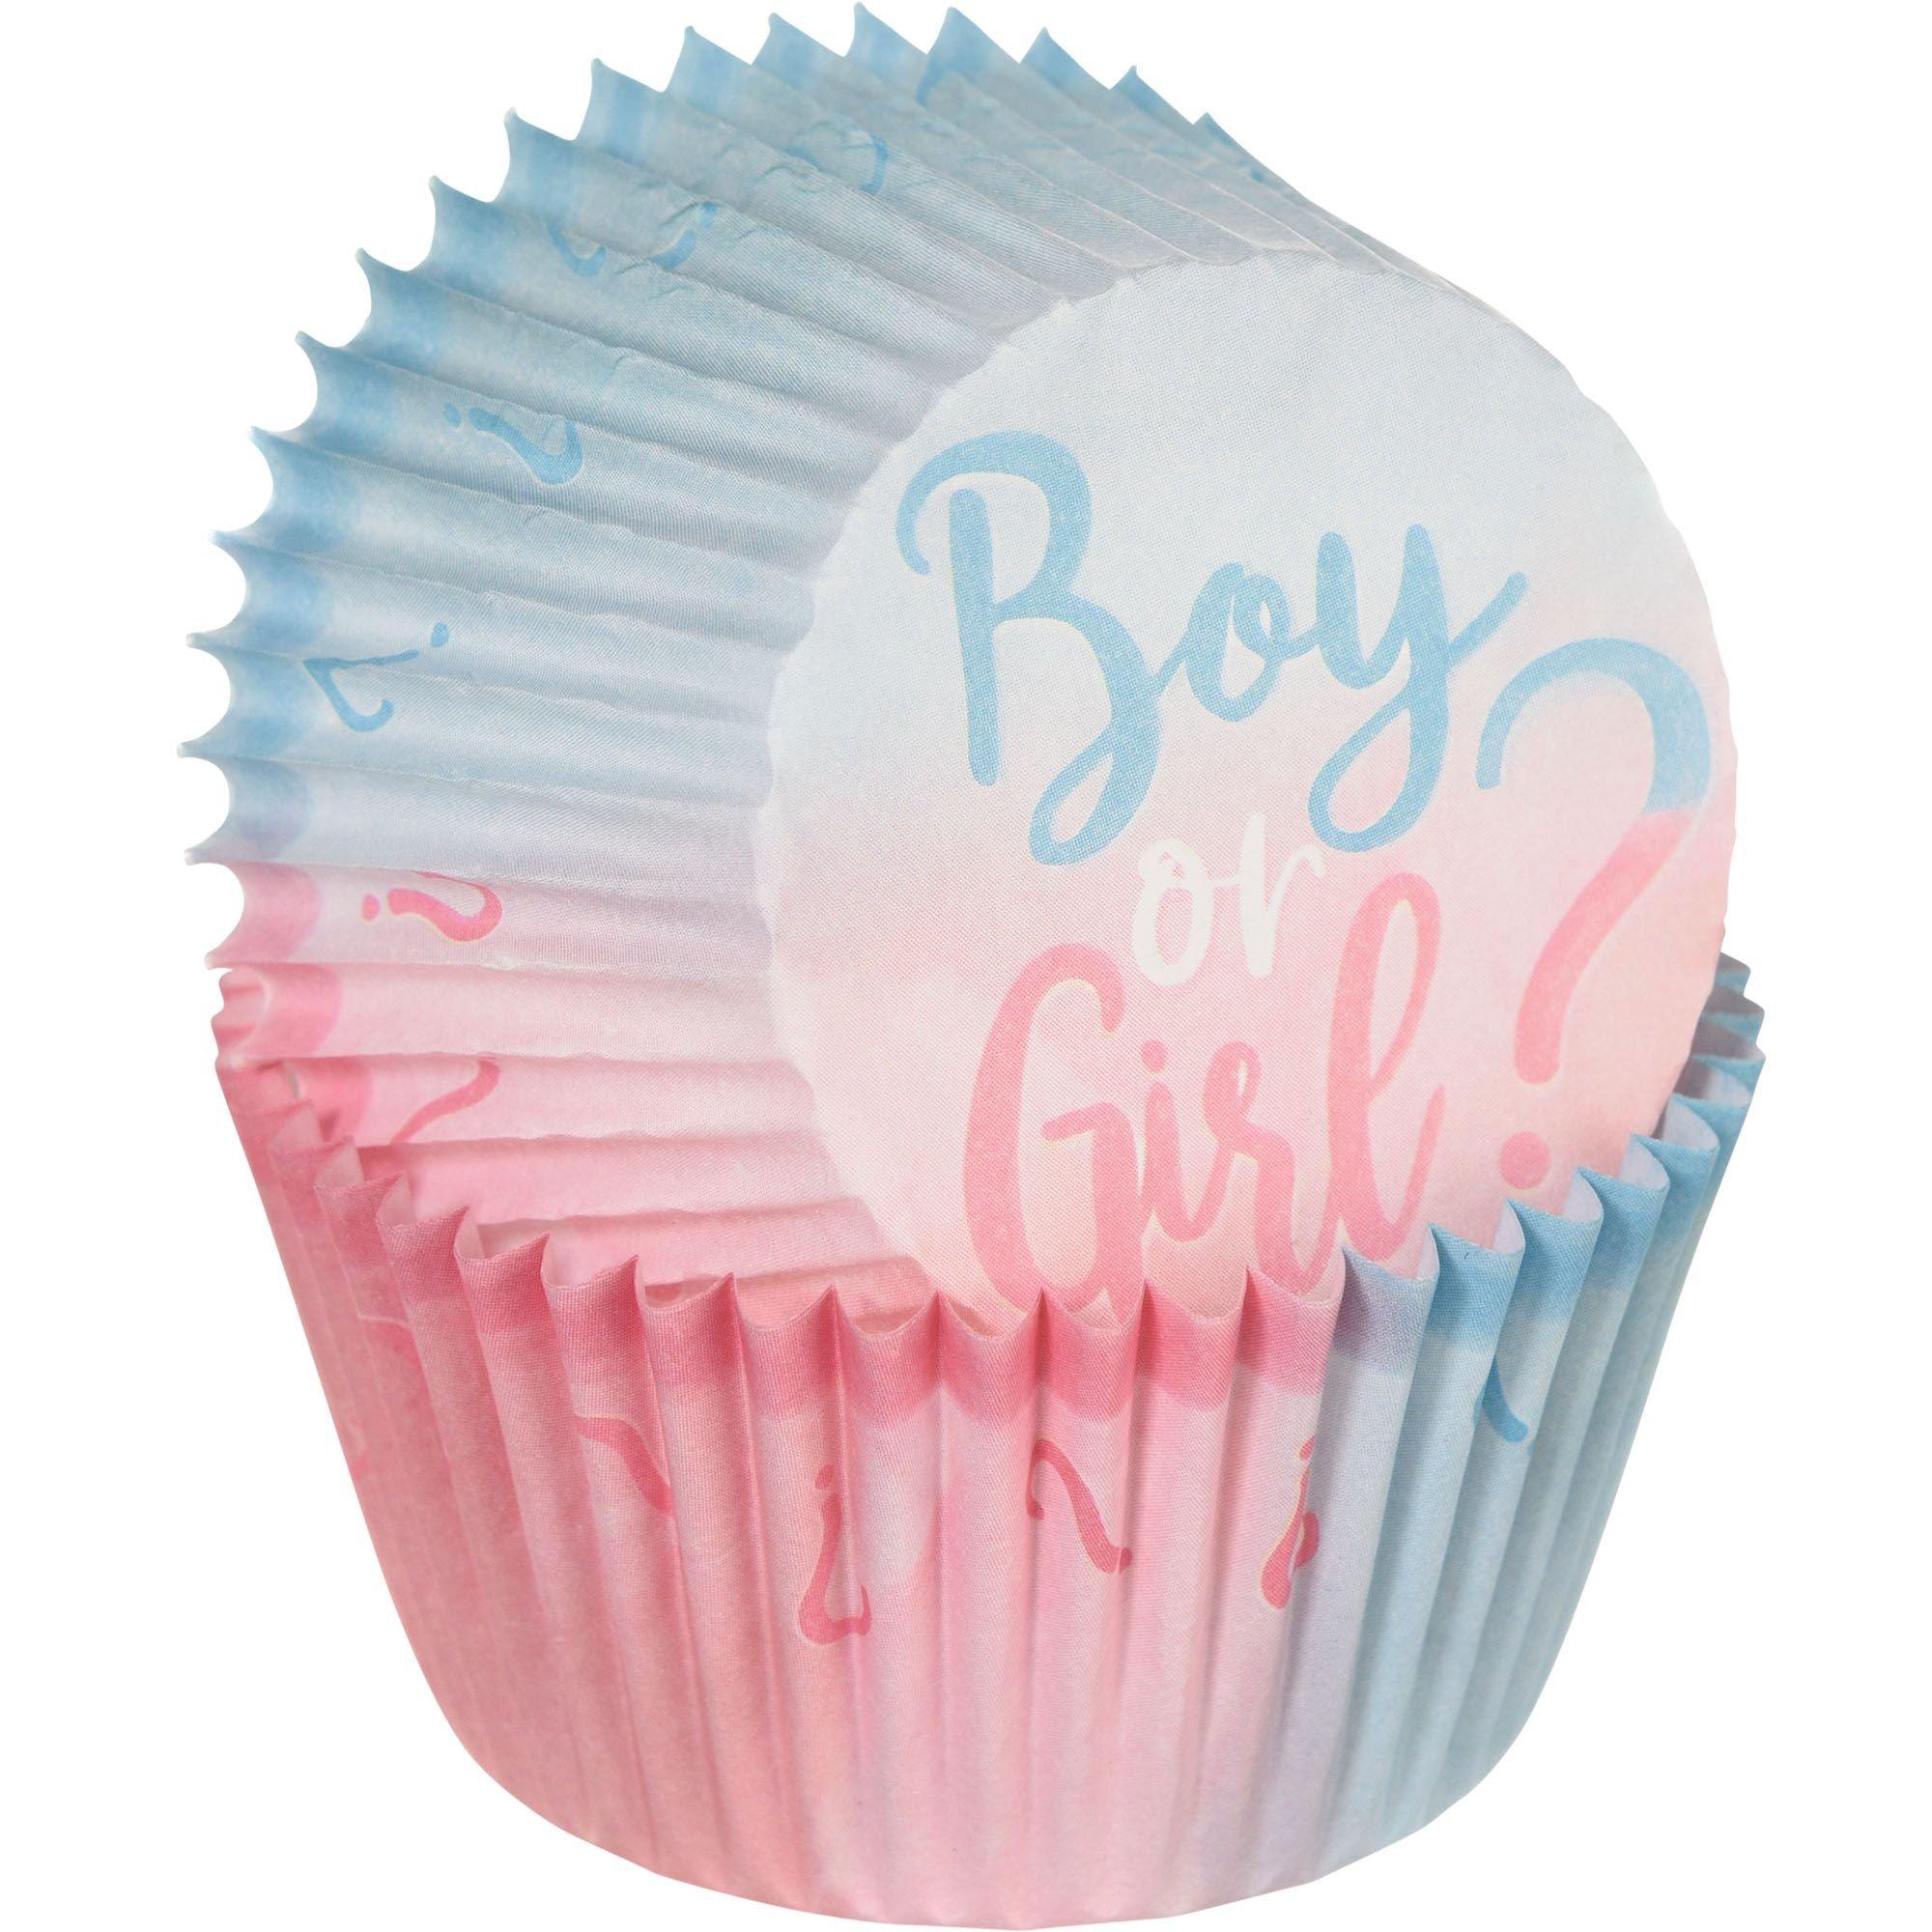 Boy or Girl Gender Paper Baking Cups, 75ct - The Big |